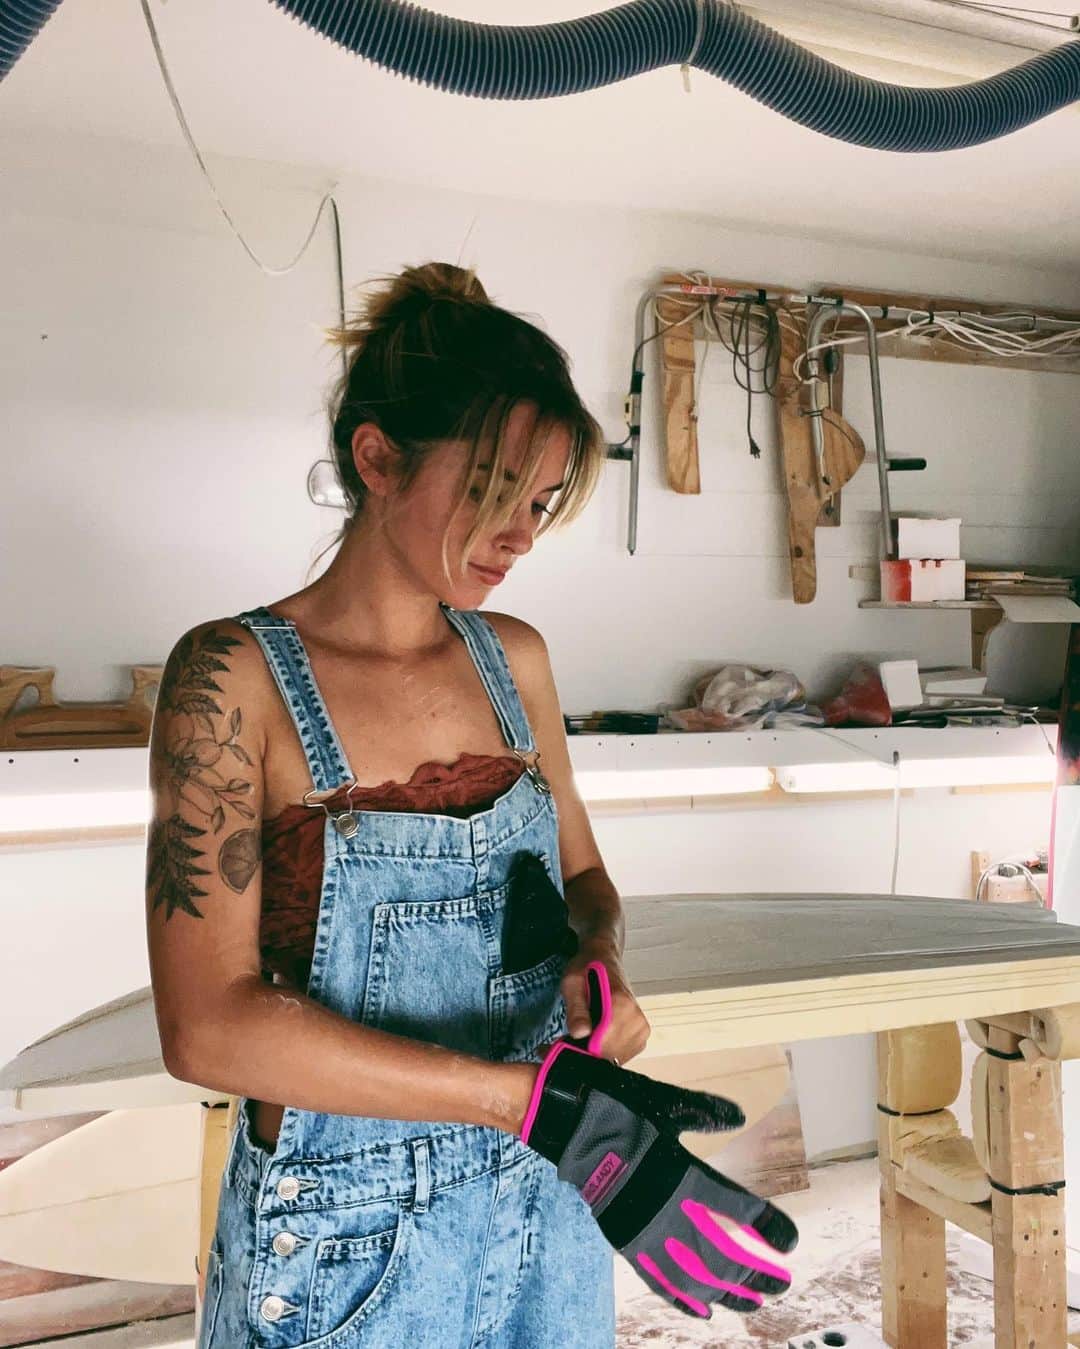 Emily Zeckのインスタグラム：「- Busier than ever but living the dream 🫶🏼 the last three months have been a whirlwind of last-minute wedding planning, lots of surfboard shaping, hunting down the perfect place to open up my own shop, and gearing up for music and swimsuit projects. Excited to share it all with the people I love.」